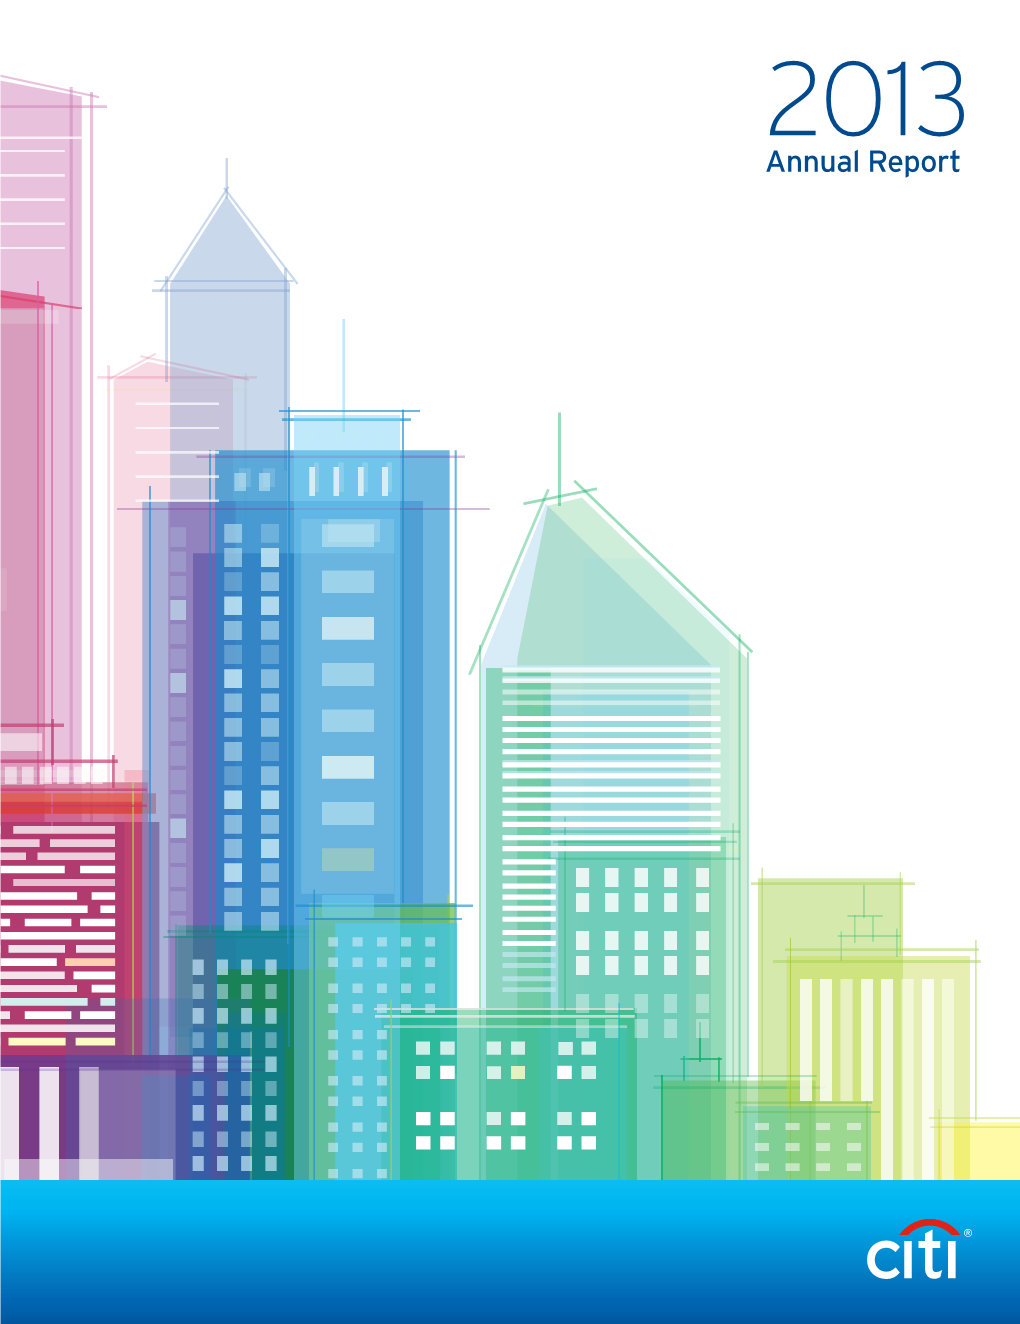 Annual Report Financial Summary